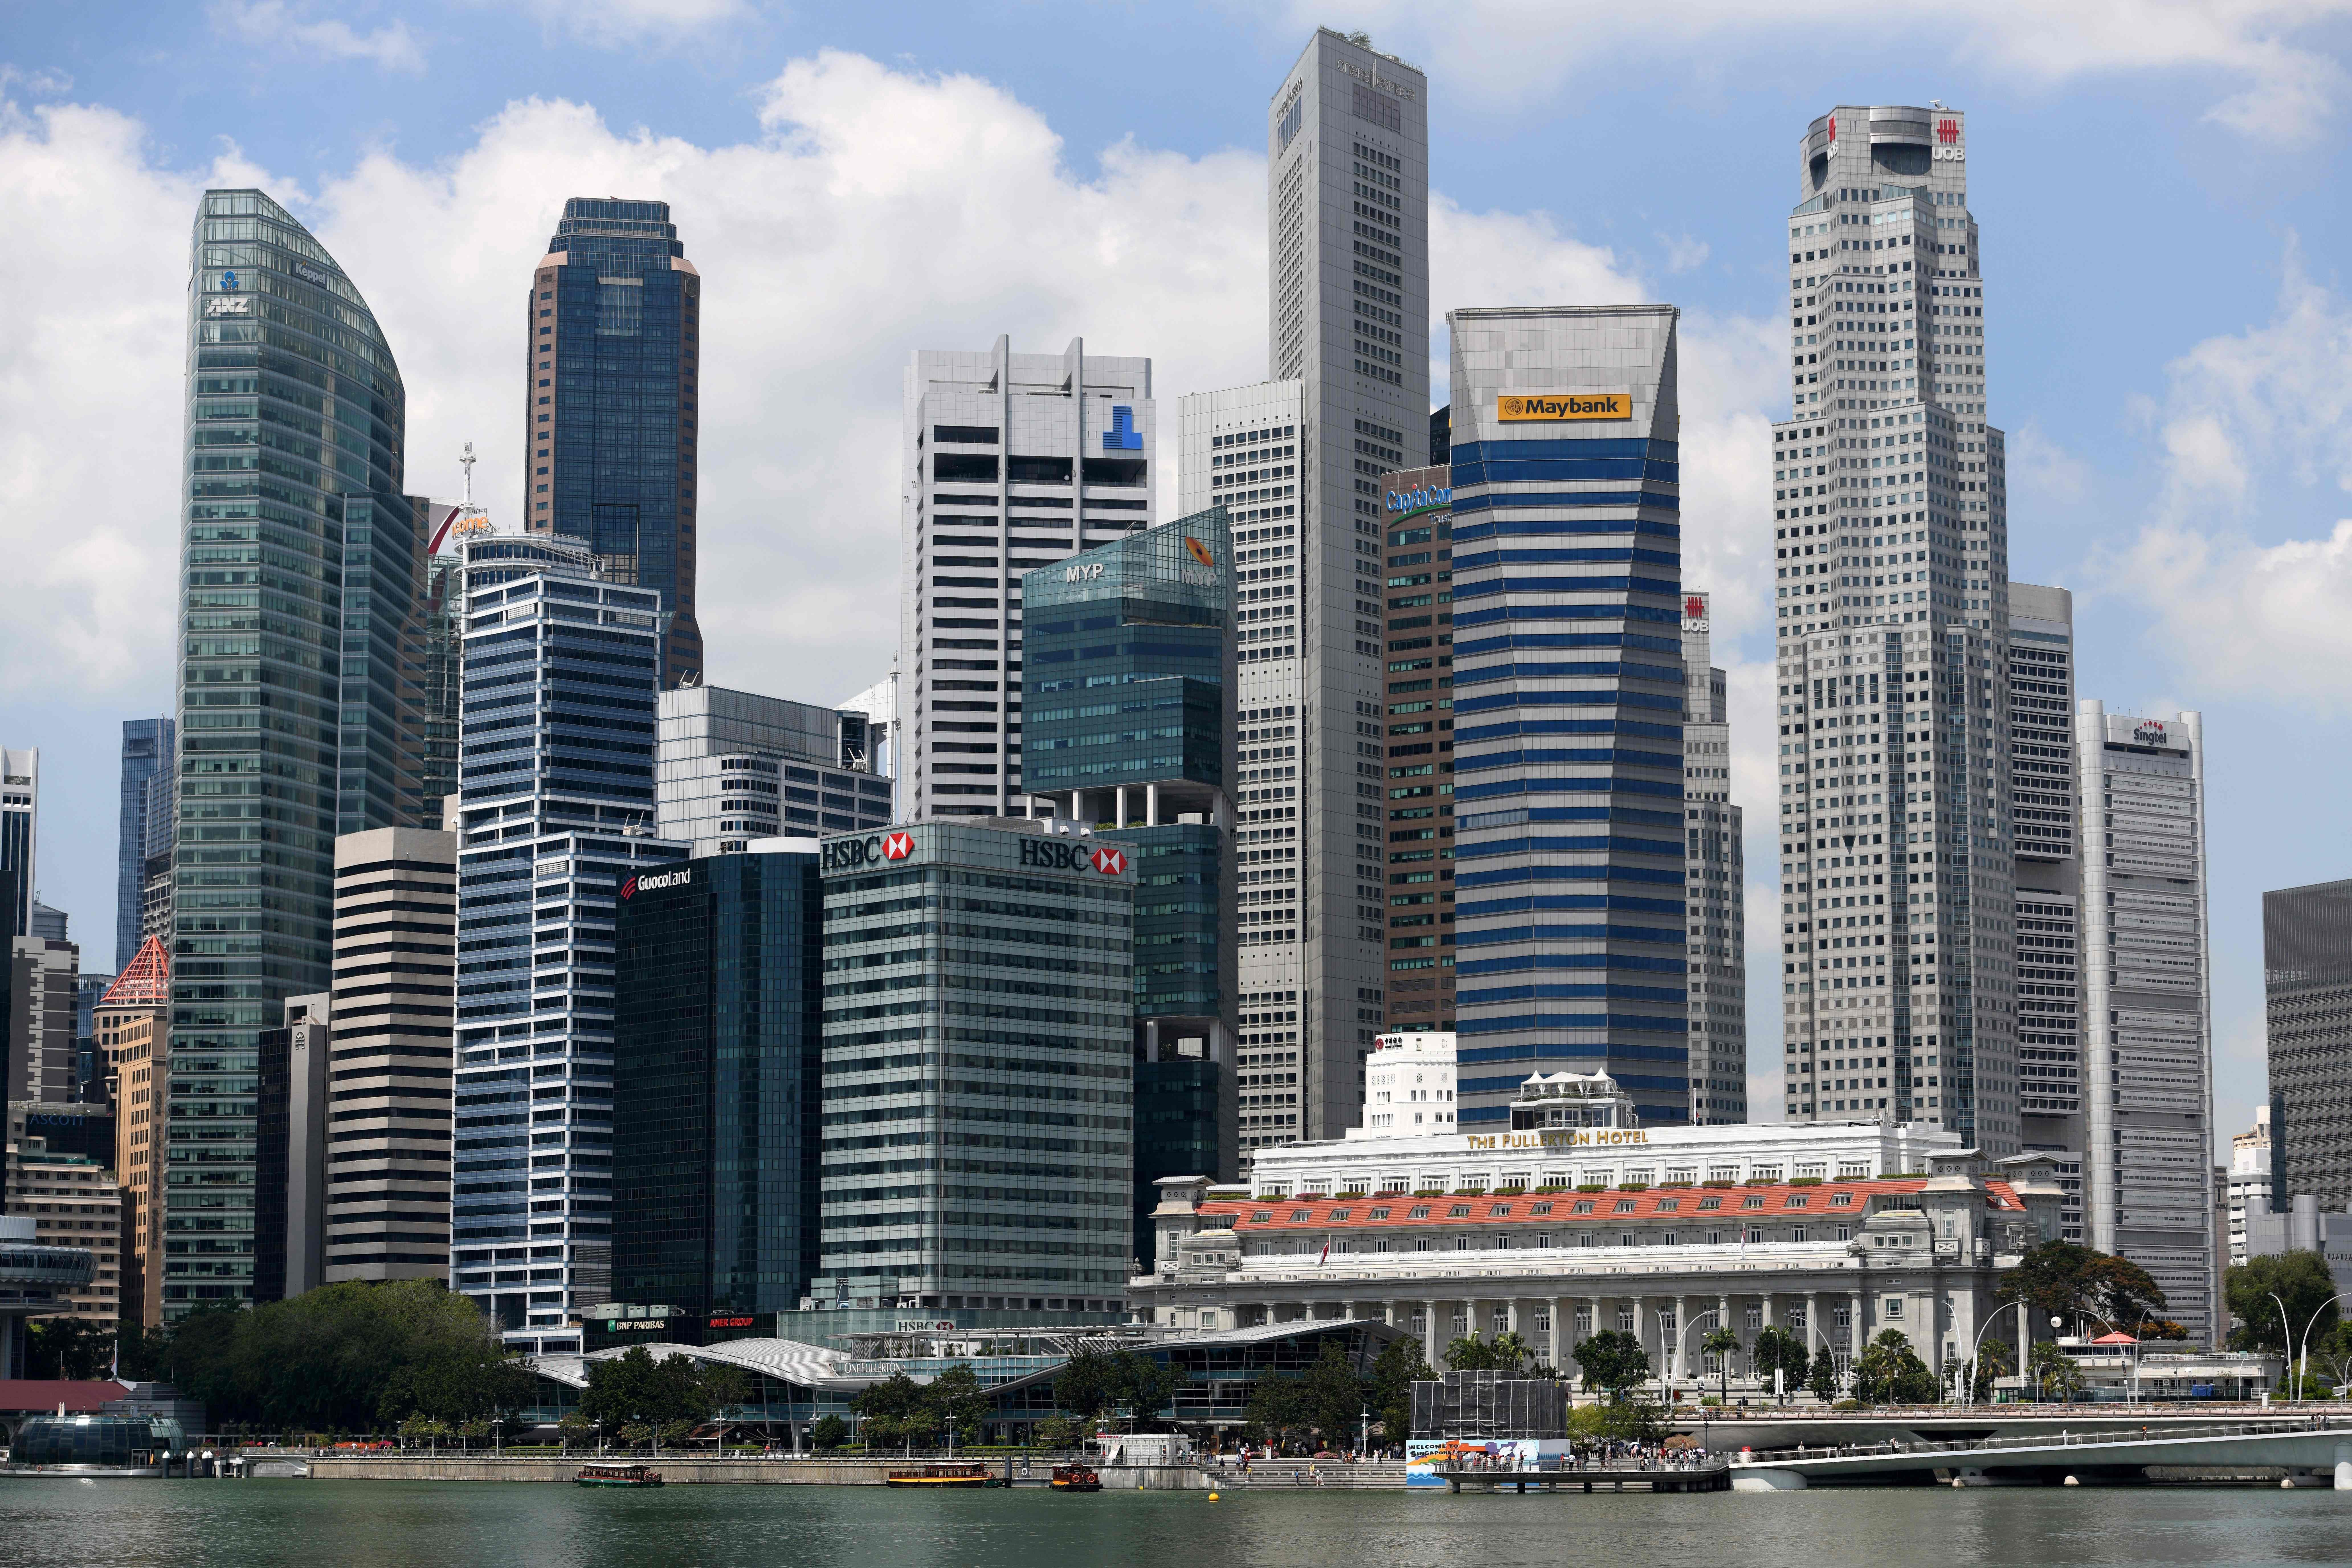 The scheme aims to rejuvenate Singapore’s central business district by encouraging the conversion of older office buildings into mixed-use development. Photo: AFP